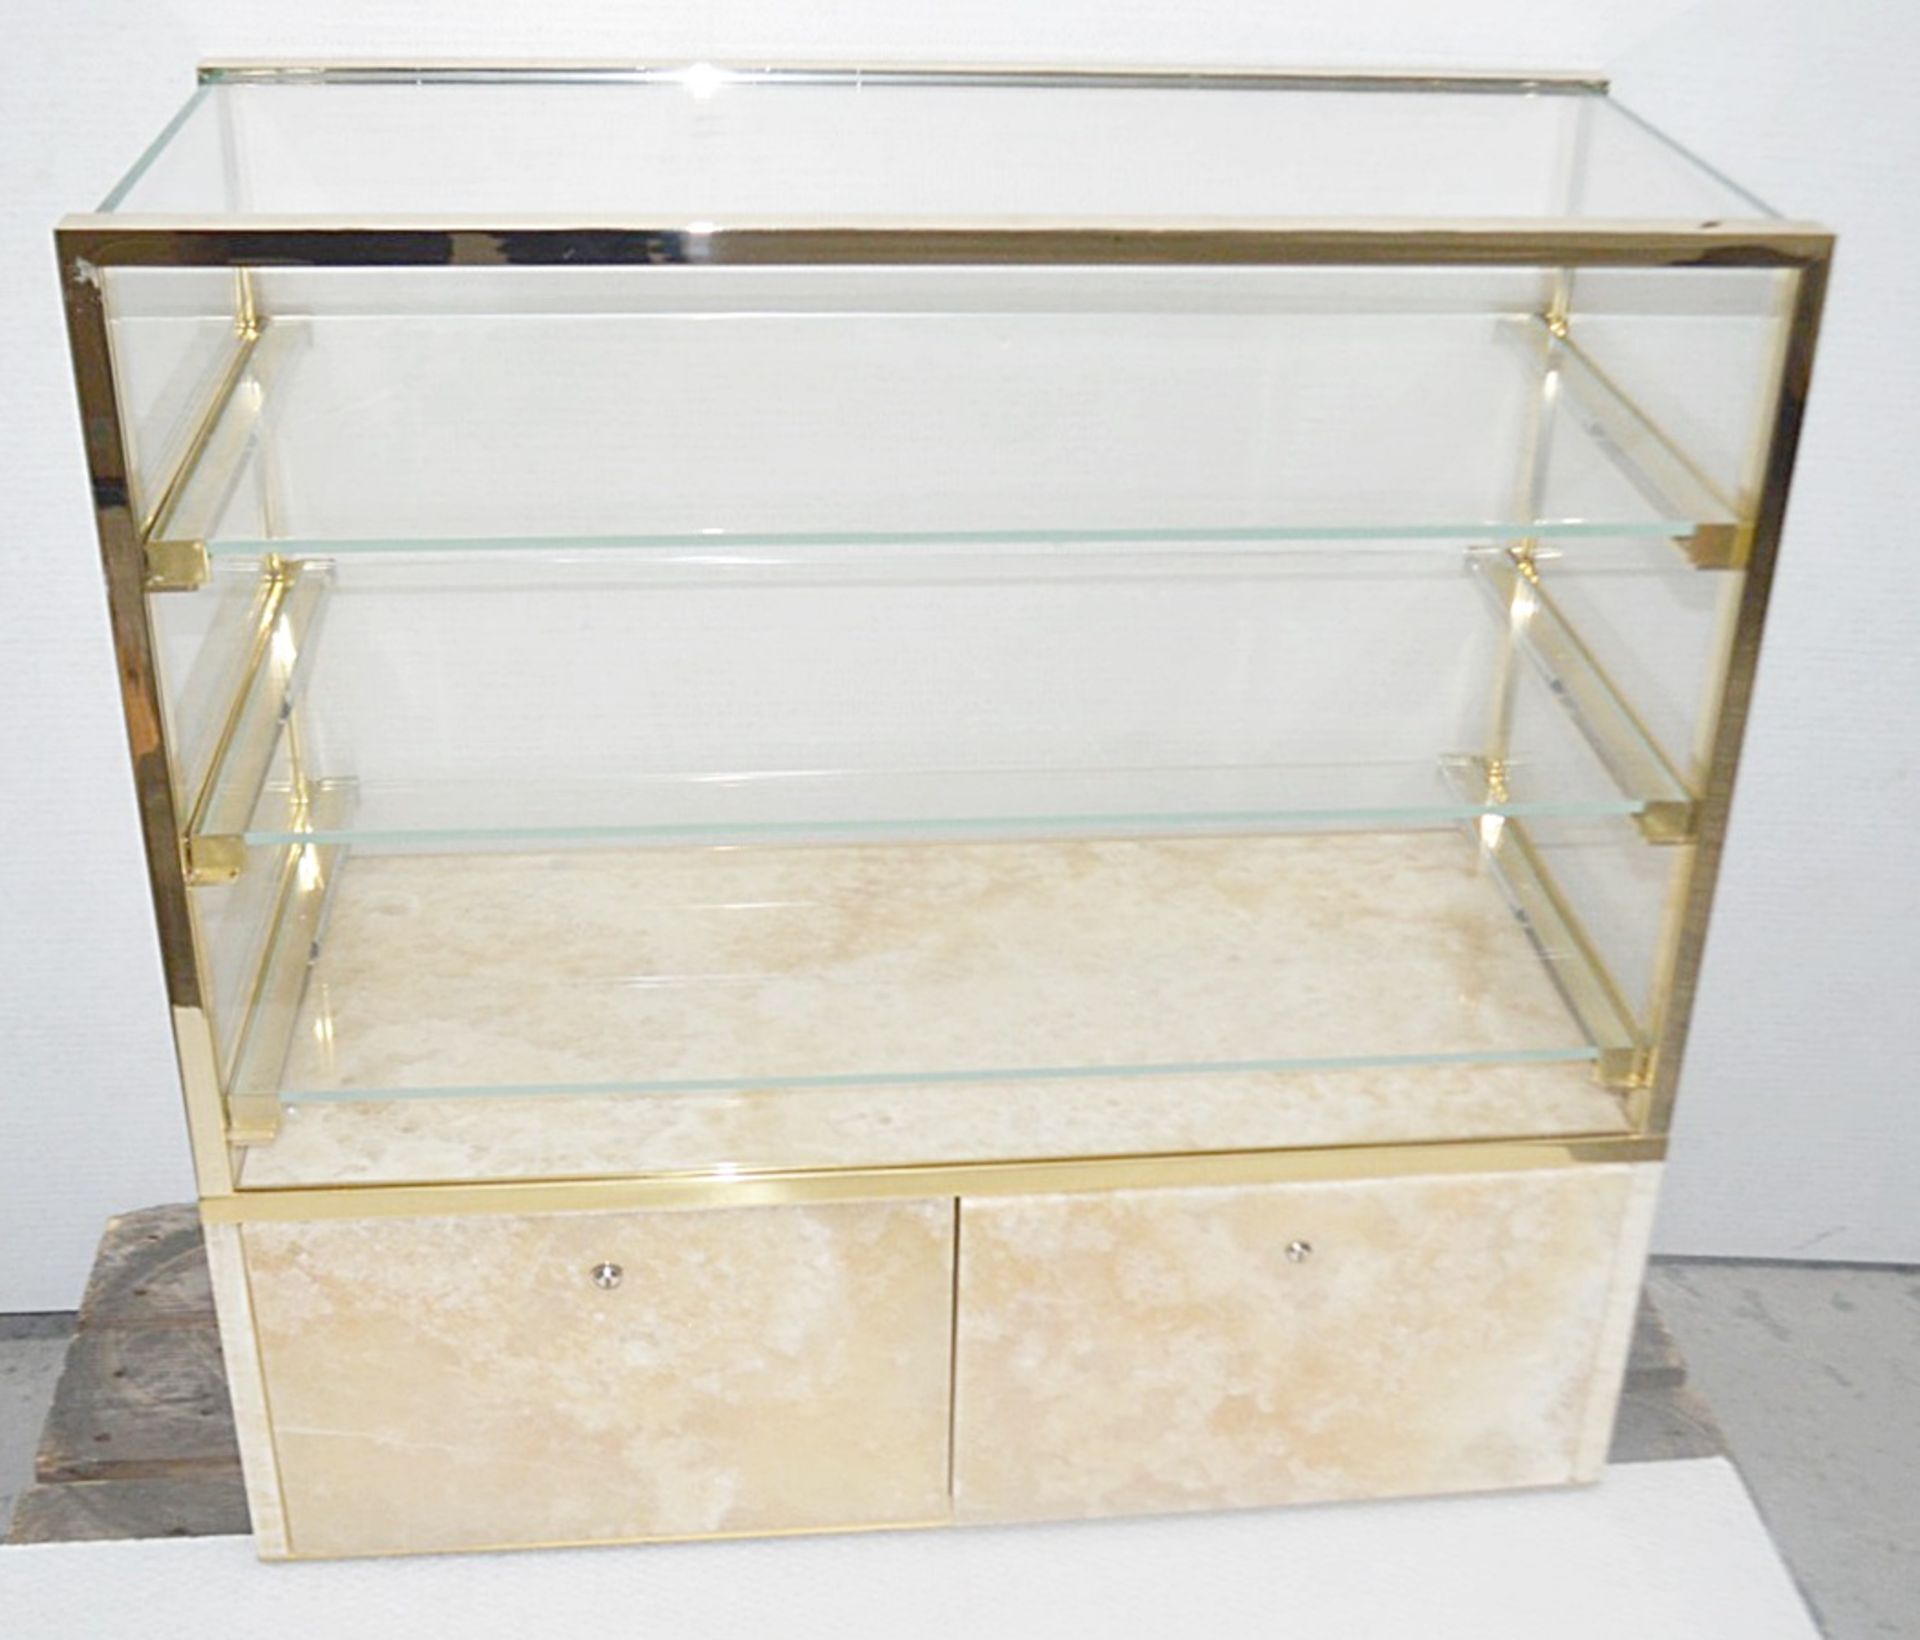 1 x 3-Tier Glass Retail Display Case With Natural Stone Base And Drawer Fronts - Image 5 of 5